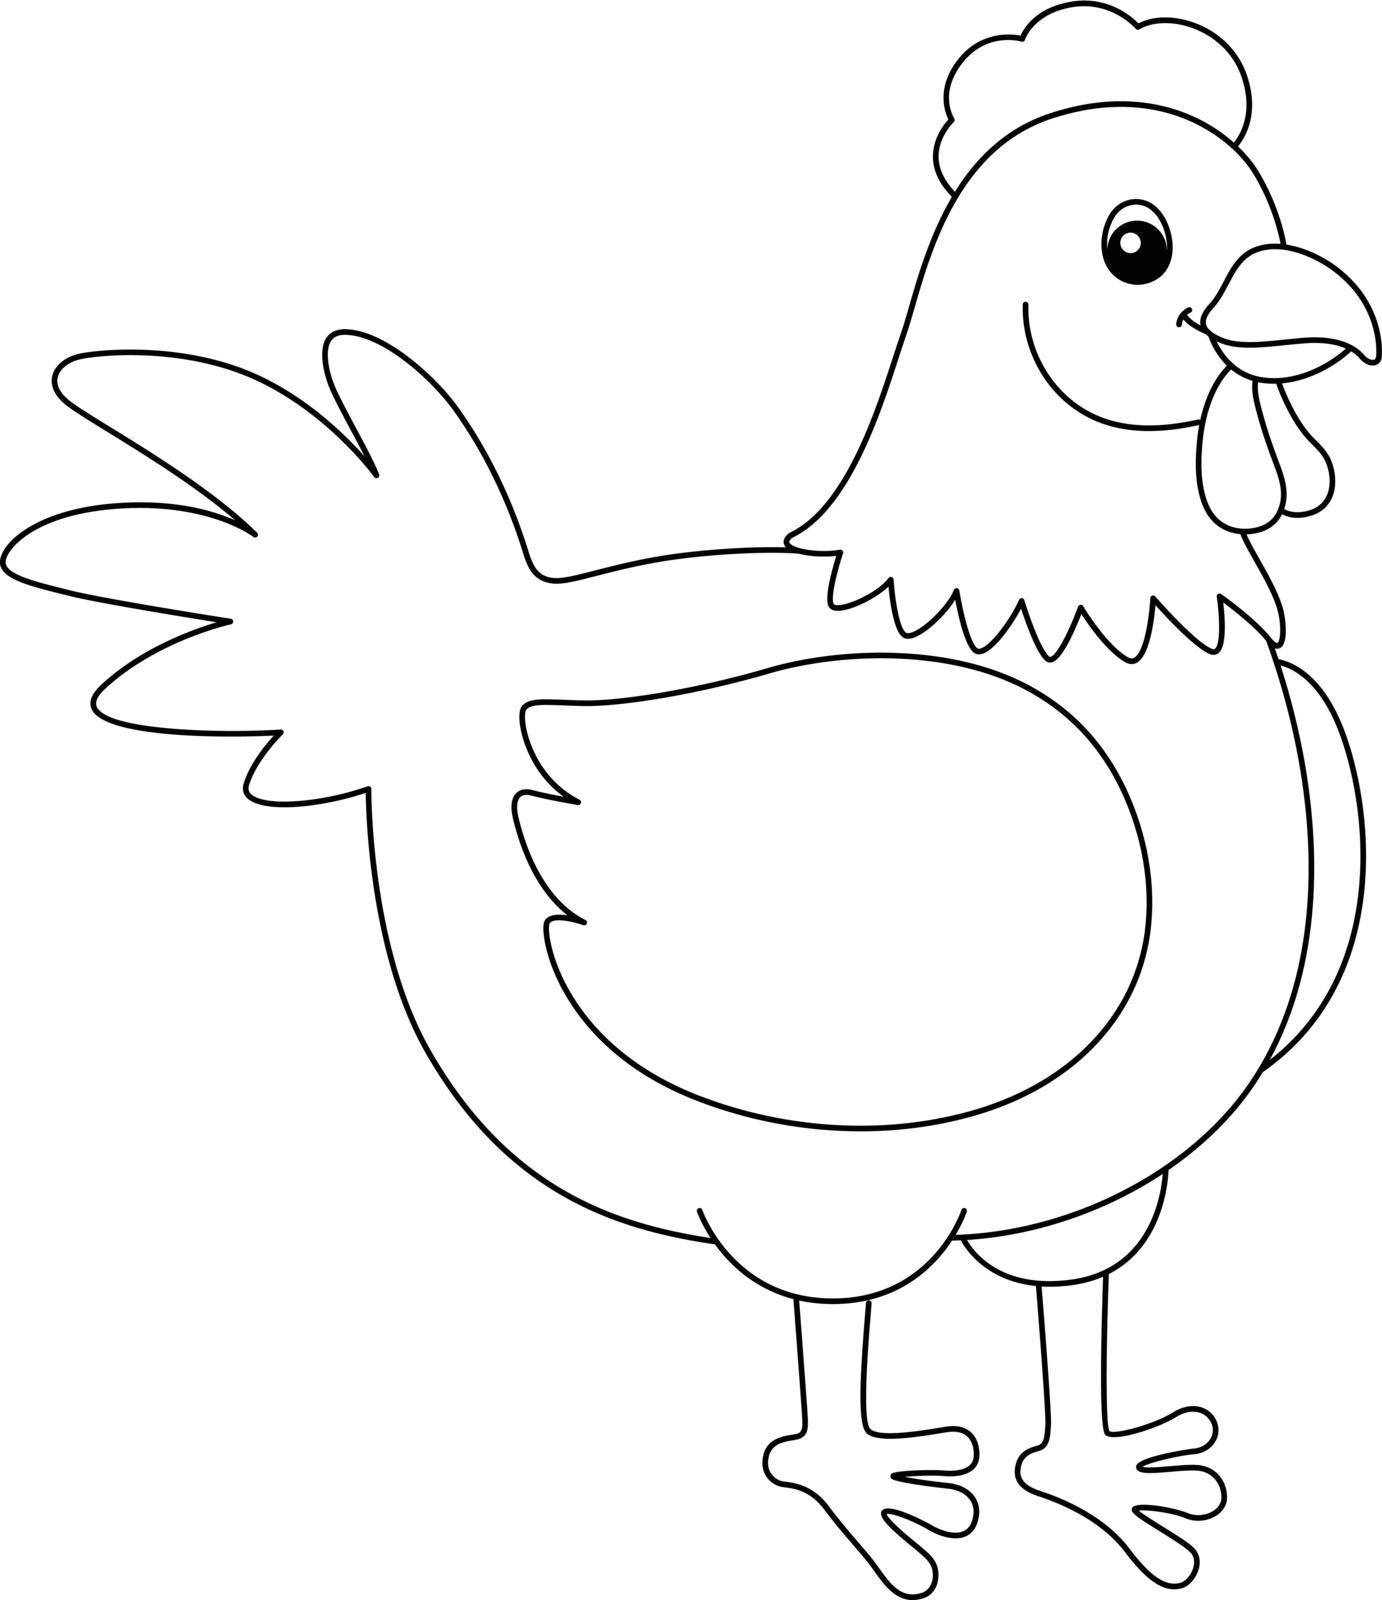 Chicken Coloring Page Isolated for Kids by abbydesign